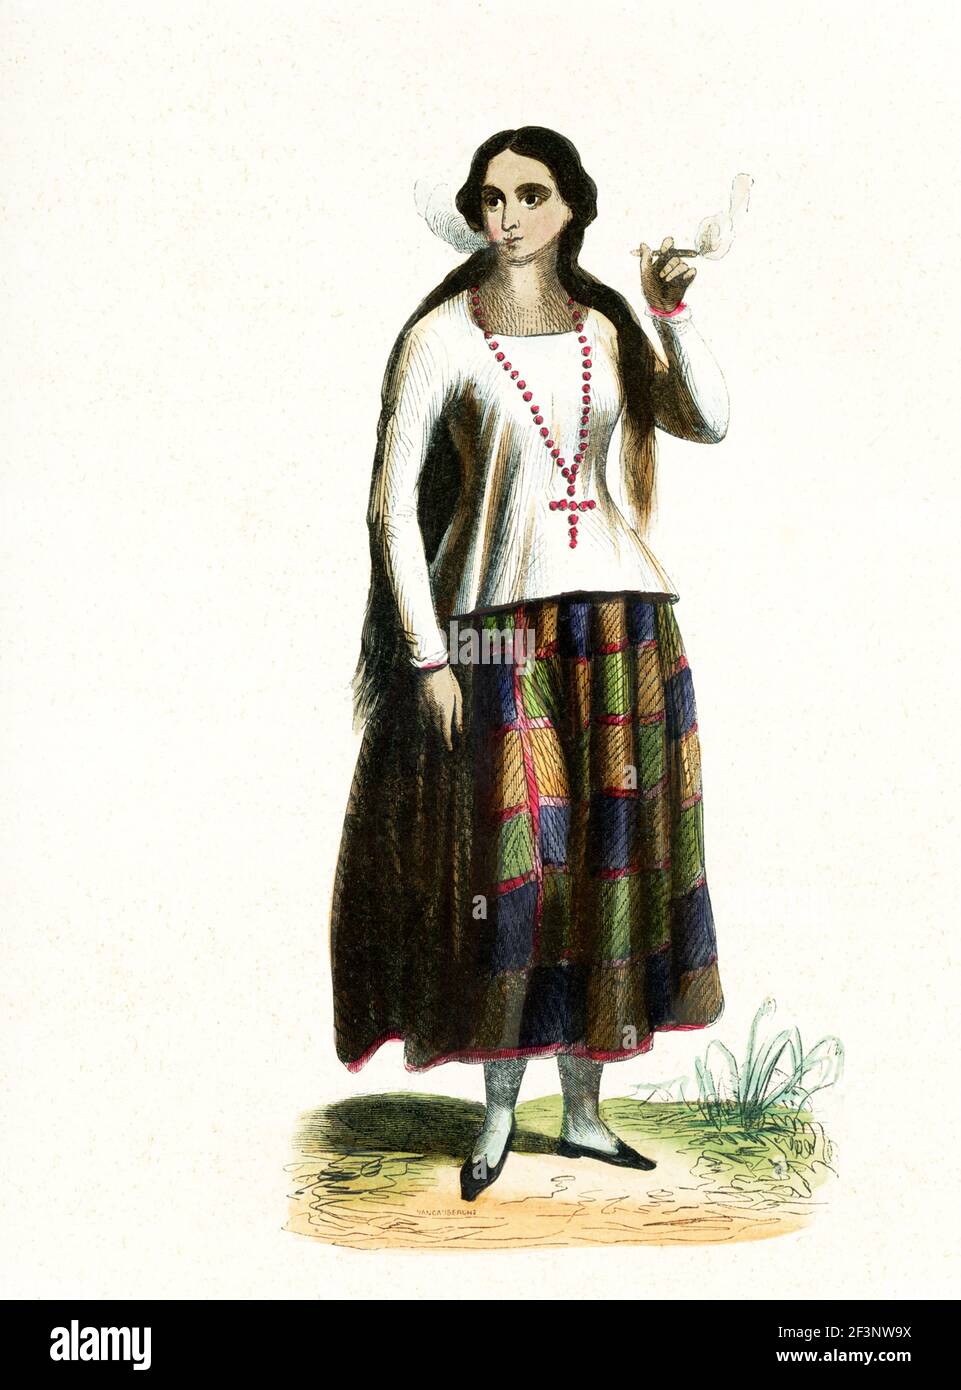 This 1840s illustration shows a lady from the island of Guam. Guam is a U.S. island territory in Micronesia, in the Western Pacific. Guam is part of the area of the world known as Oceania. Oceania is a geographic region that includes Australasia, Melanesia, Micronesia and Polynesia. Spanning the Eastern and Western Hemispheres, Oceania has a land area of 8,525,989 square kilometers. Stock Photo